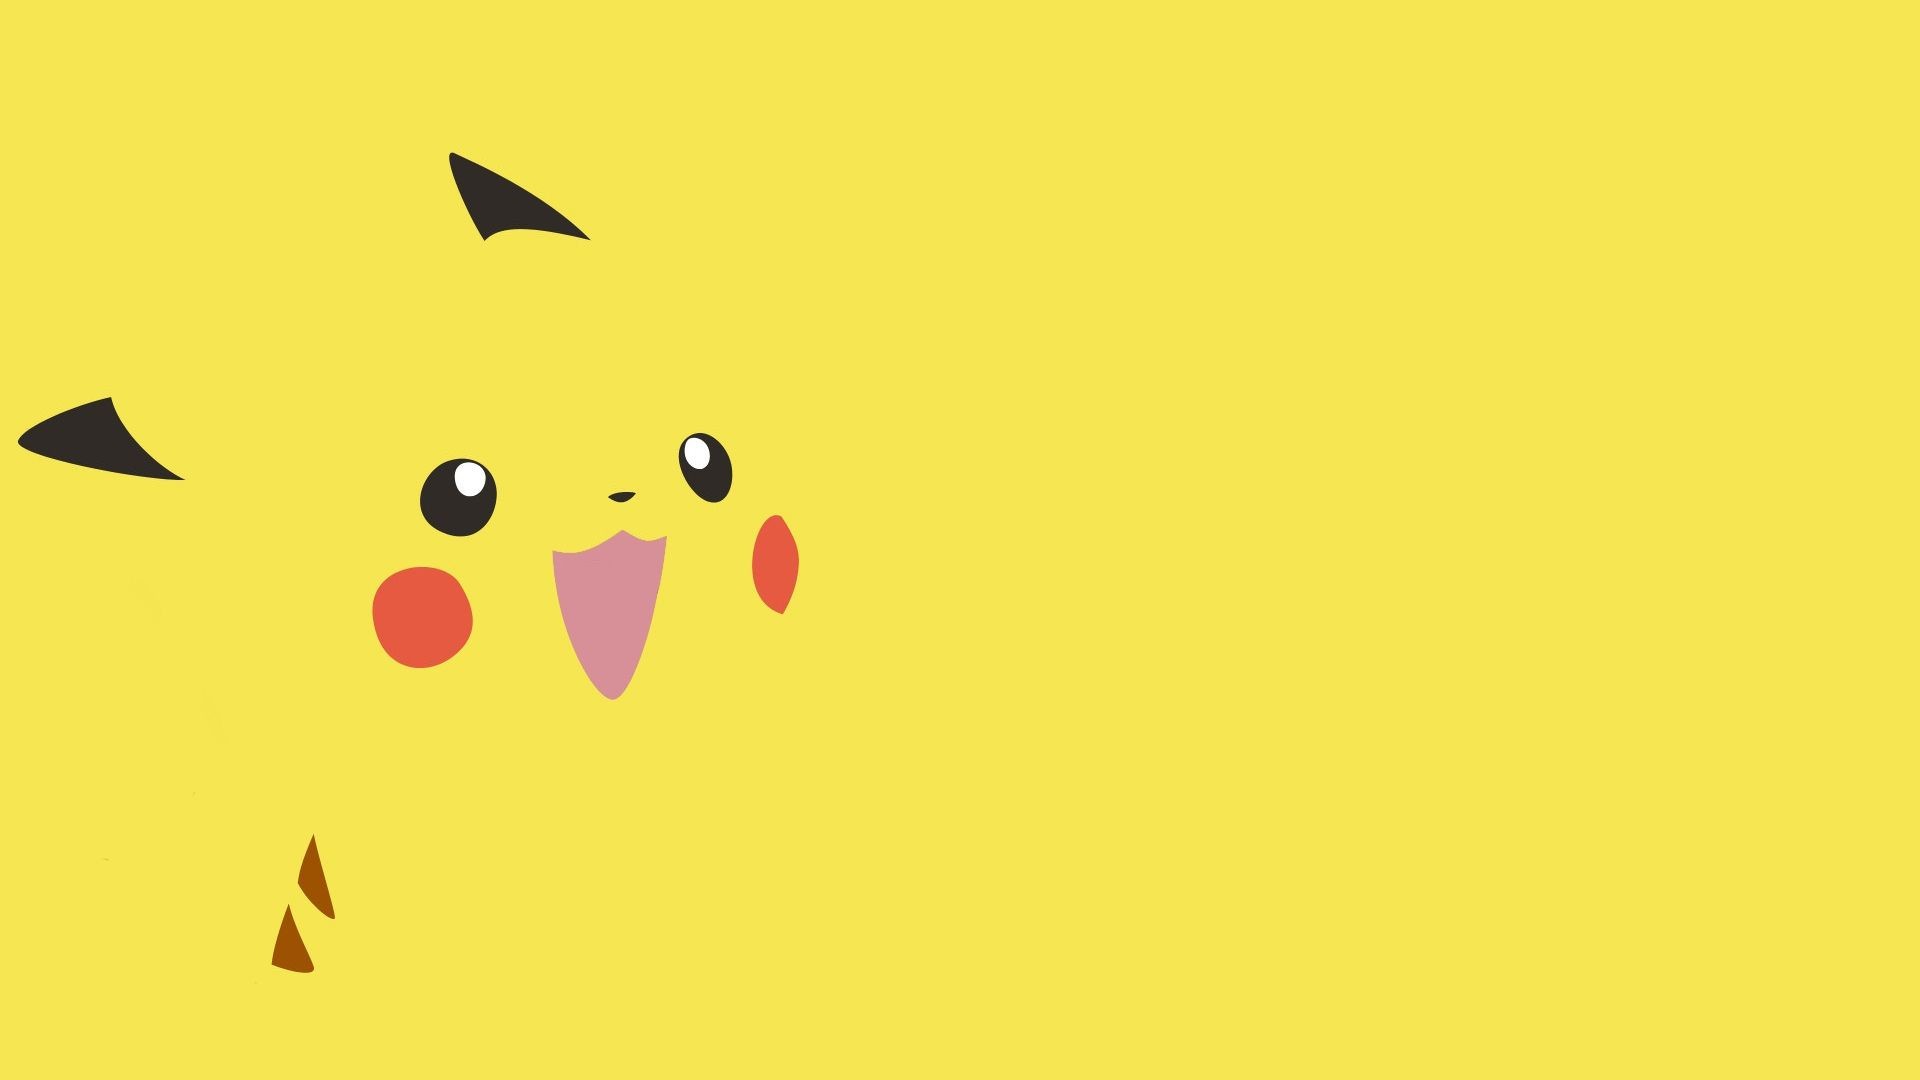 192+ Pikachu Wallpapers for Computer